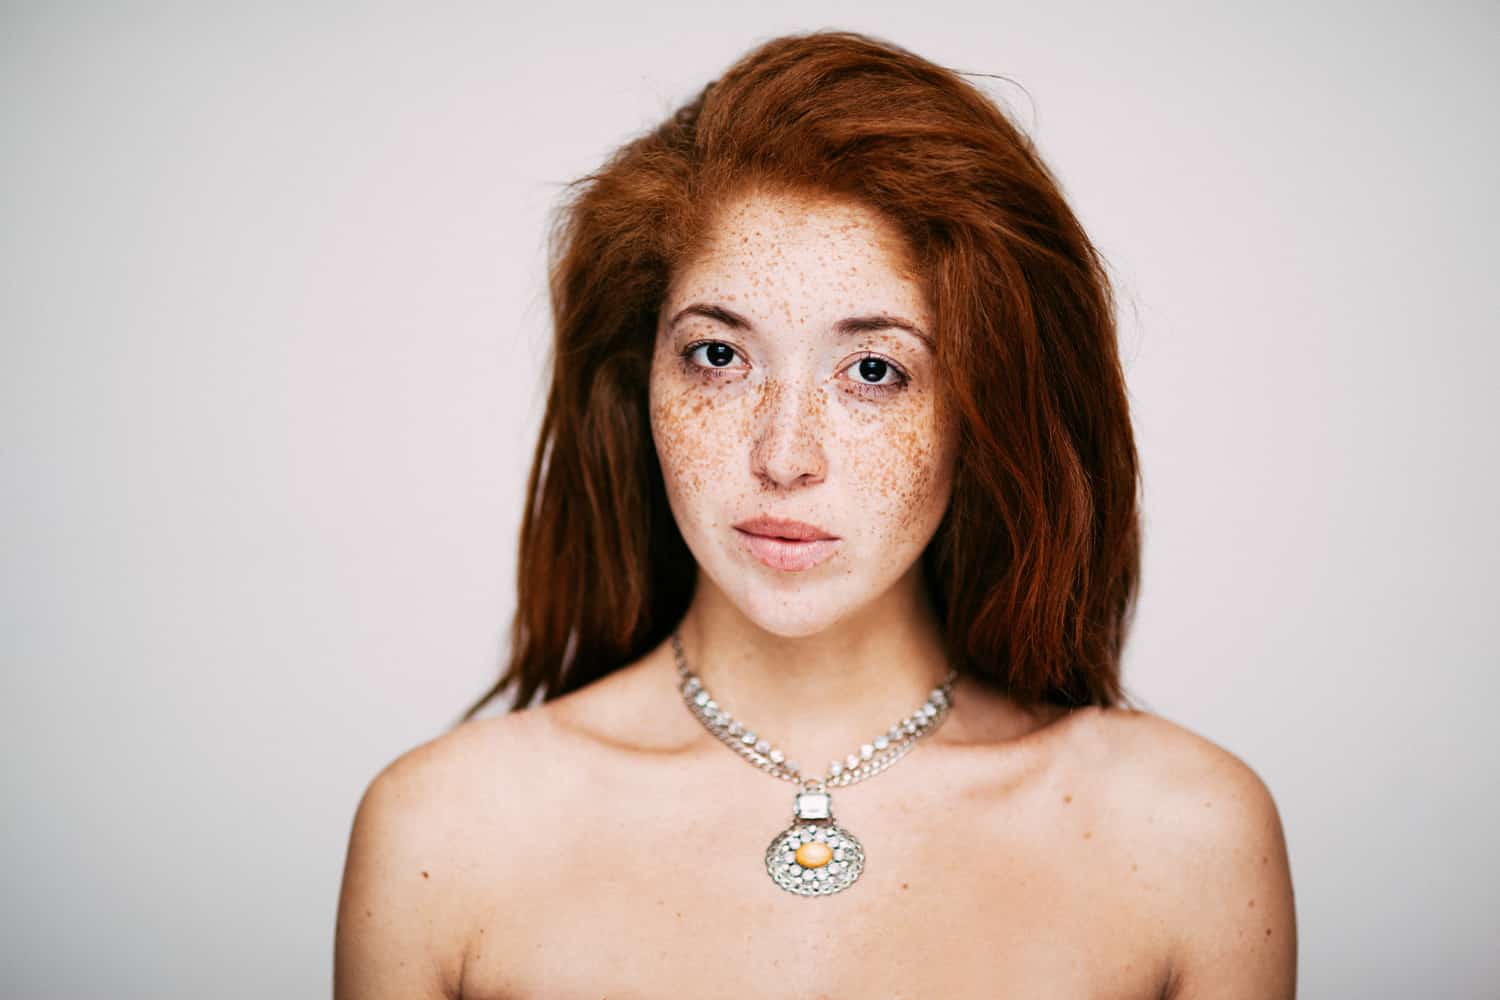 A professional portrait photographer capturing the beauty of a woman with freckled hair and a necklace.